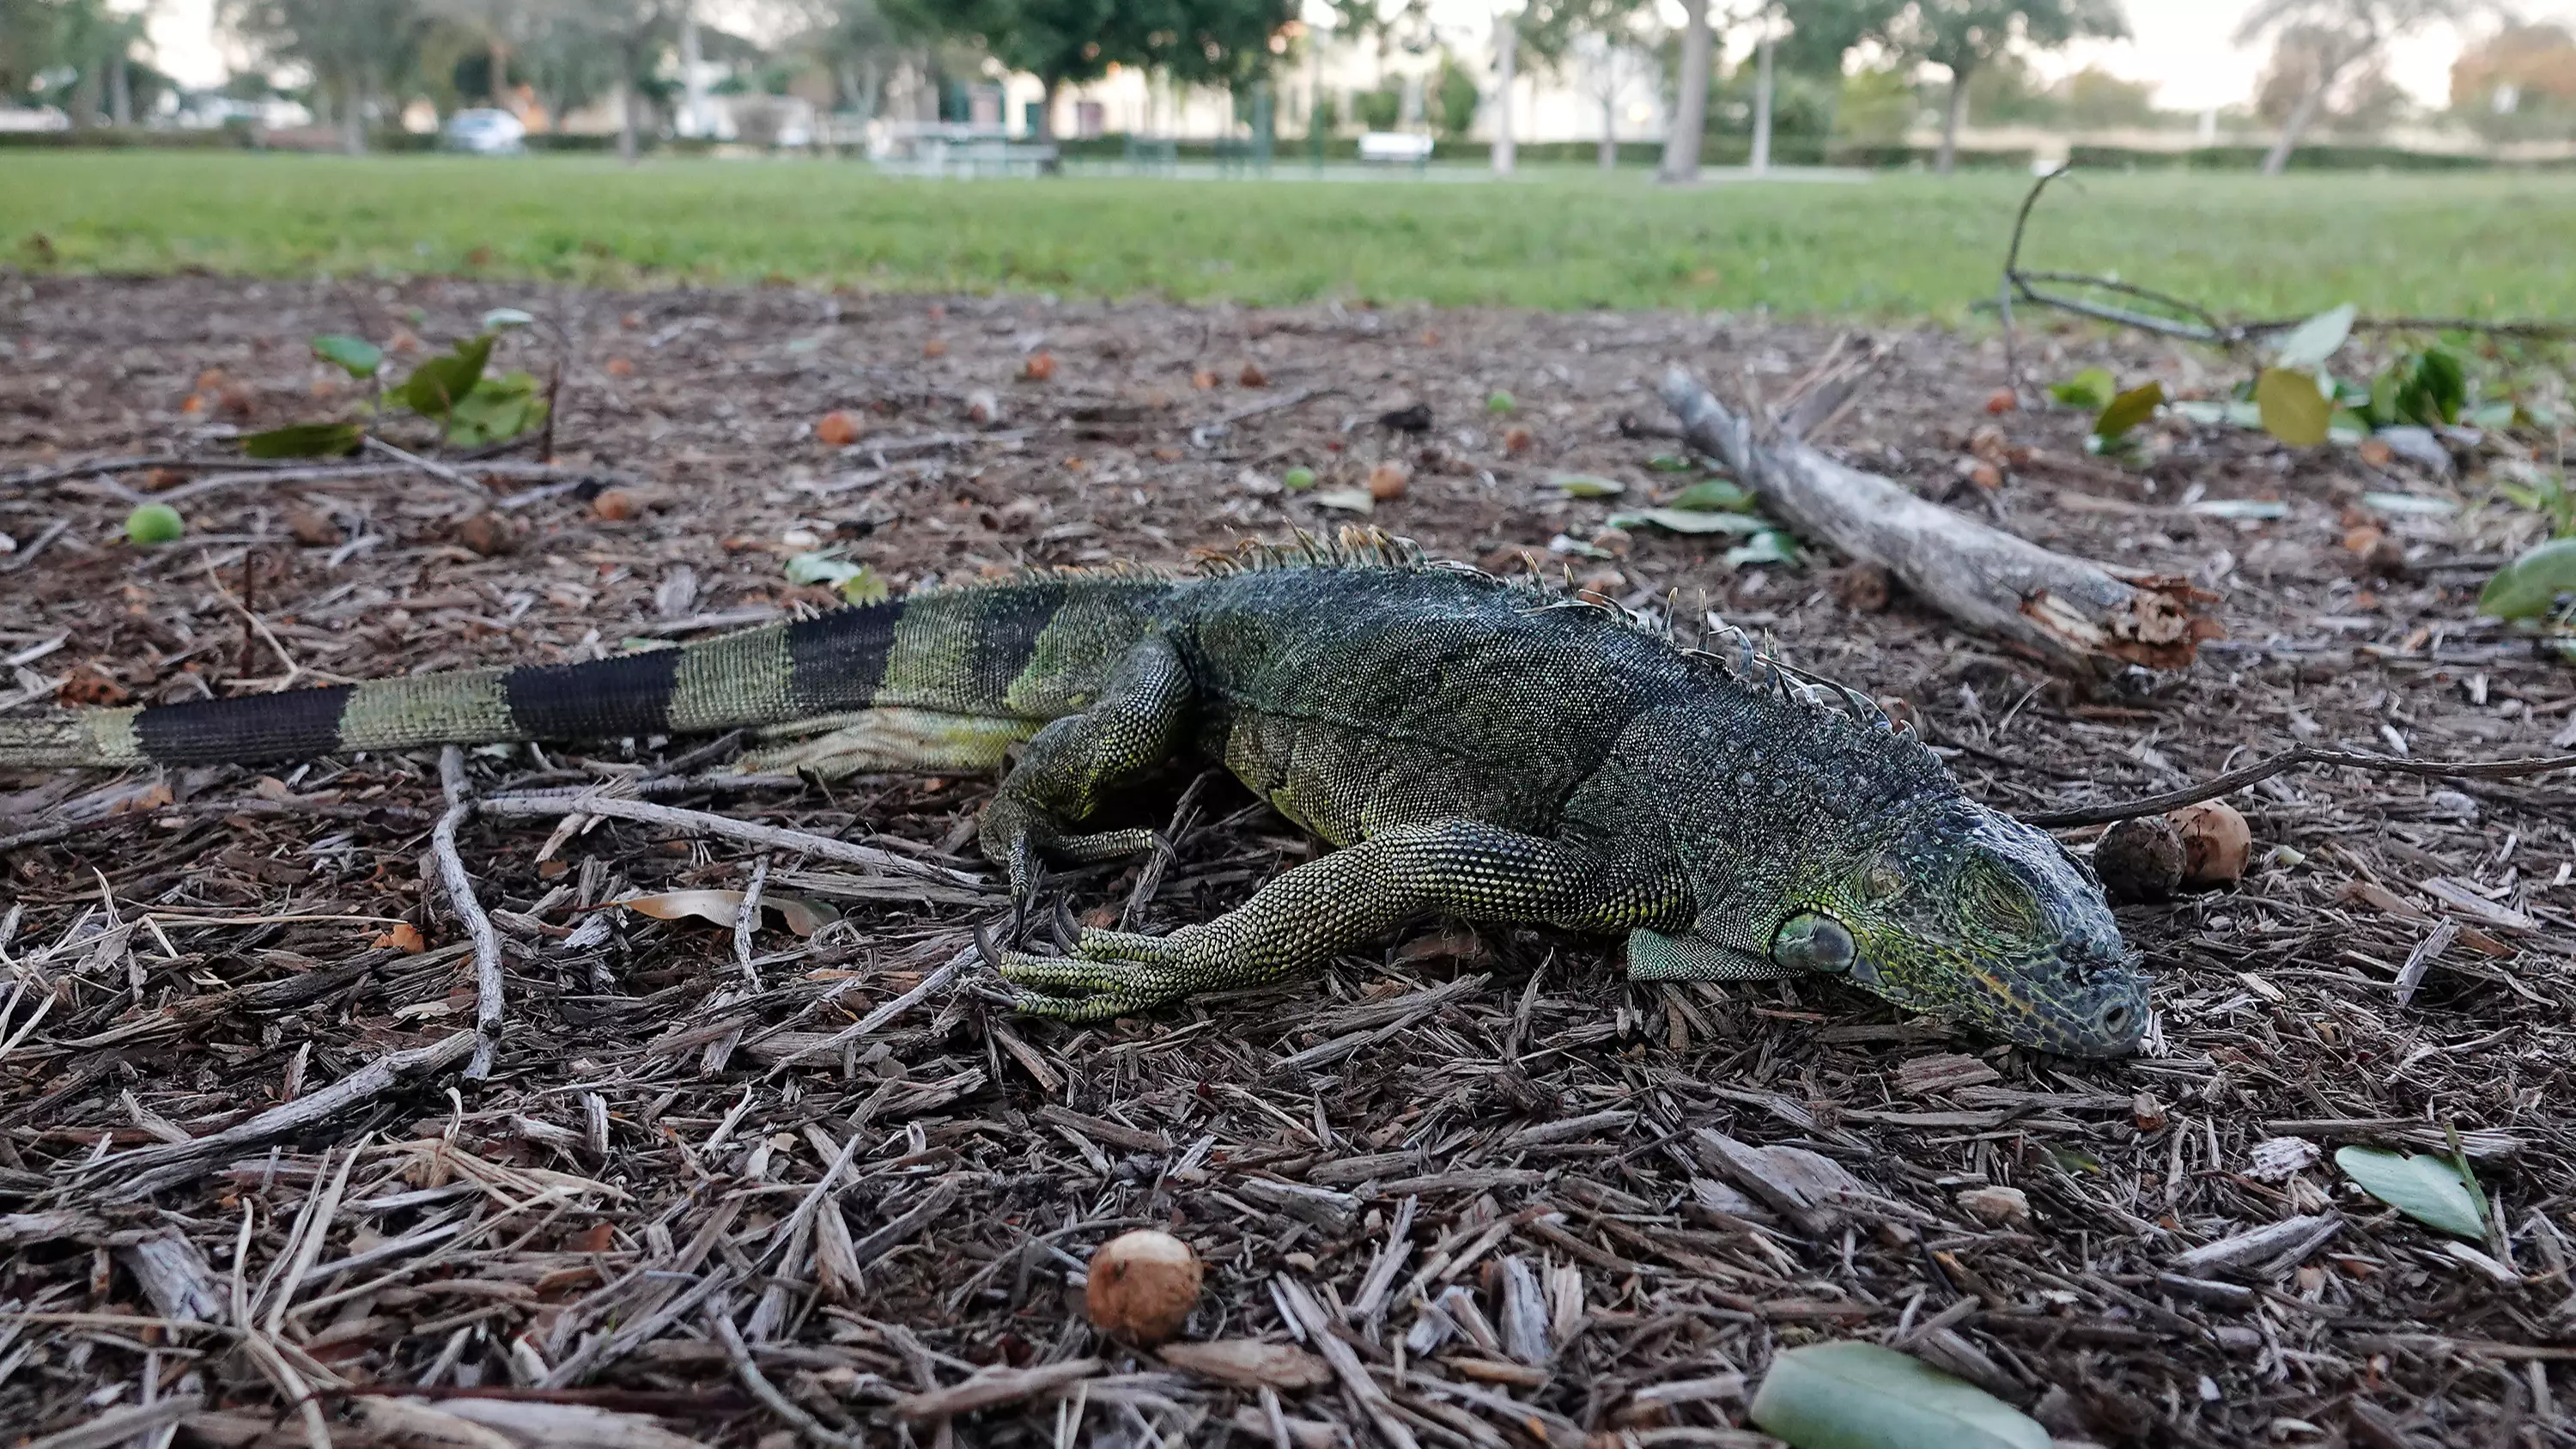 Florida Residents Warned To Be On Guard For Iguanas Falling From Trees